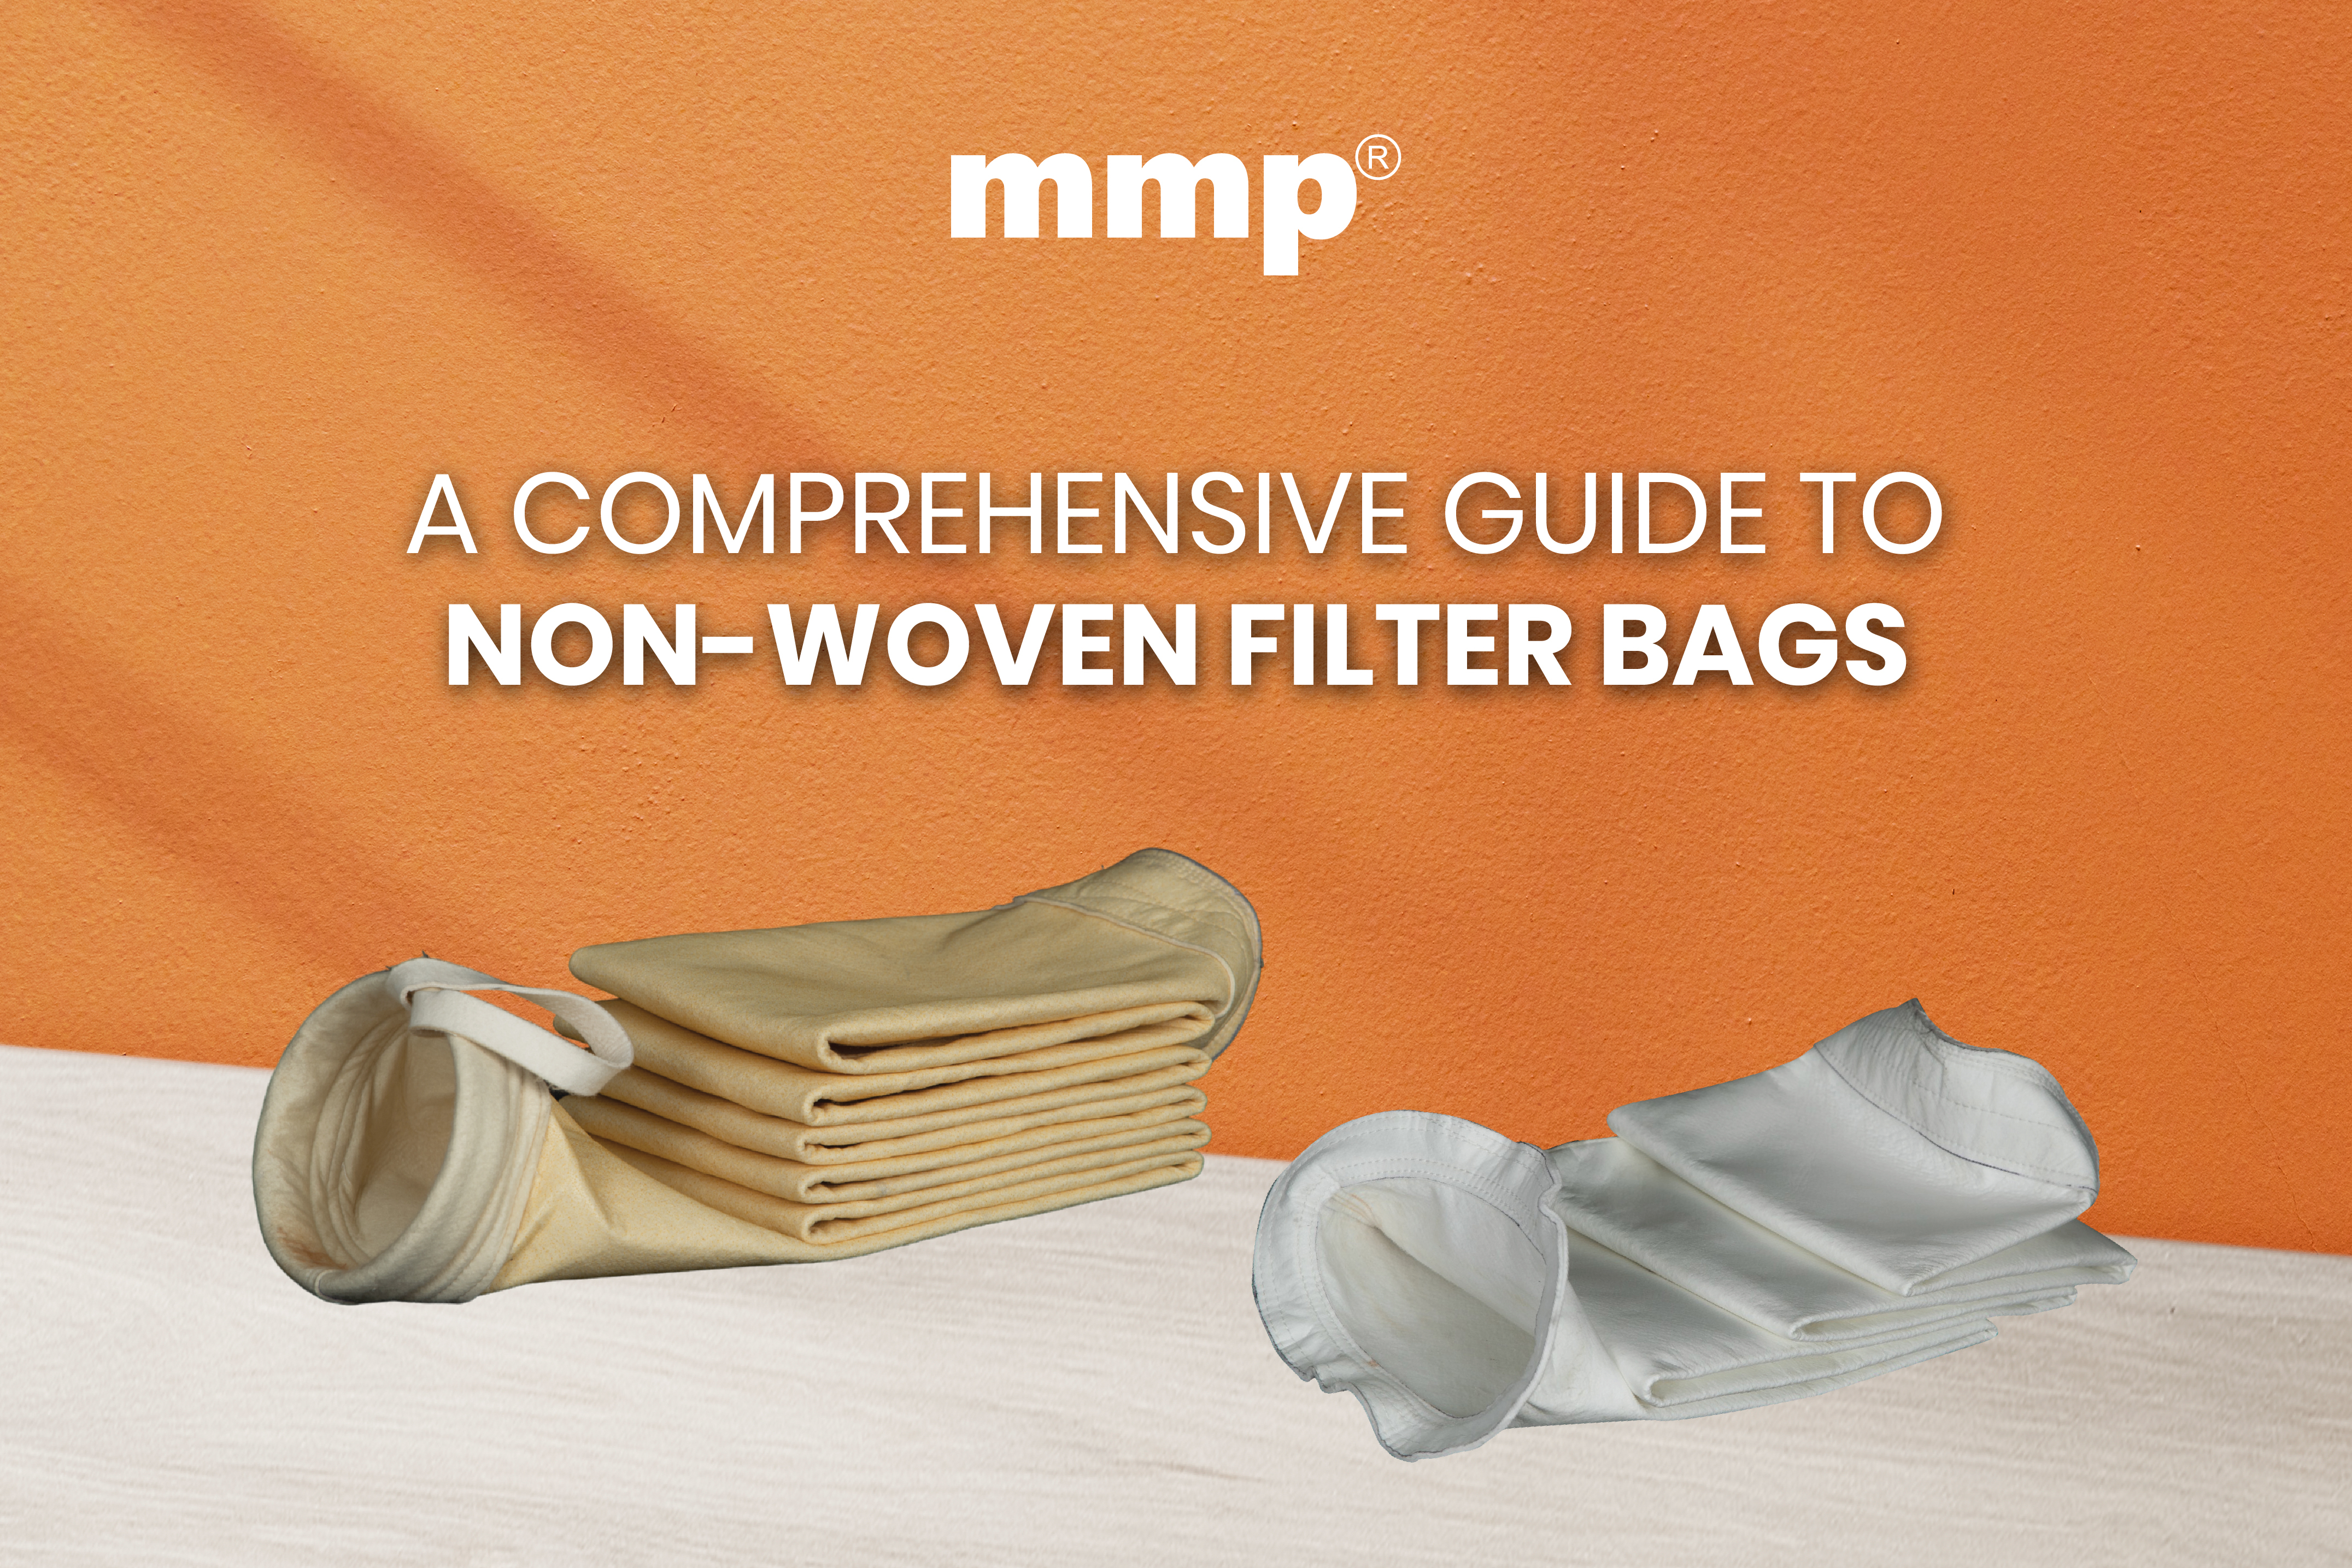 Dust collector filter bags